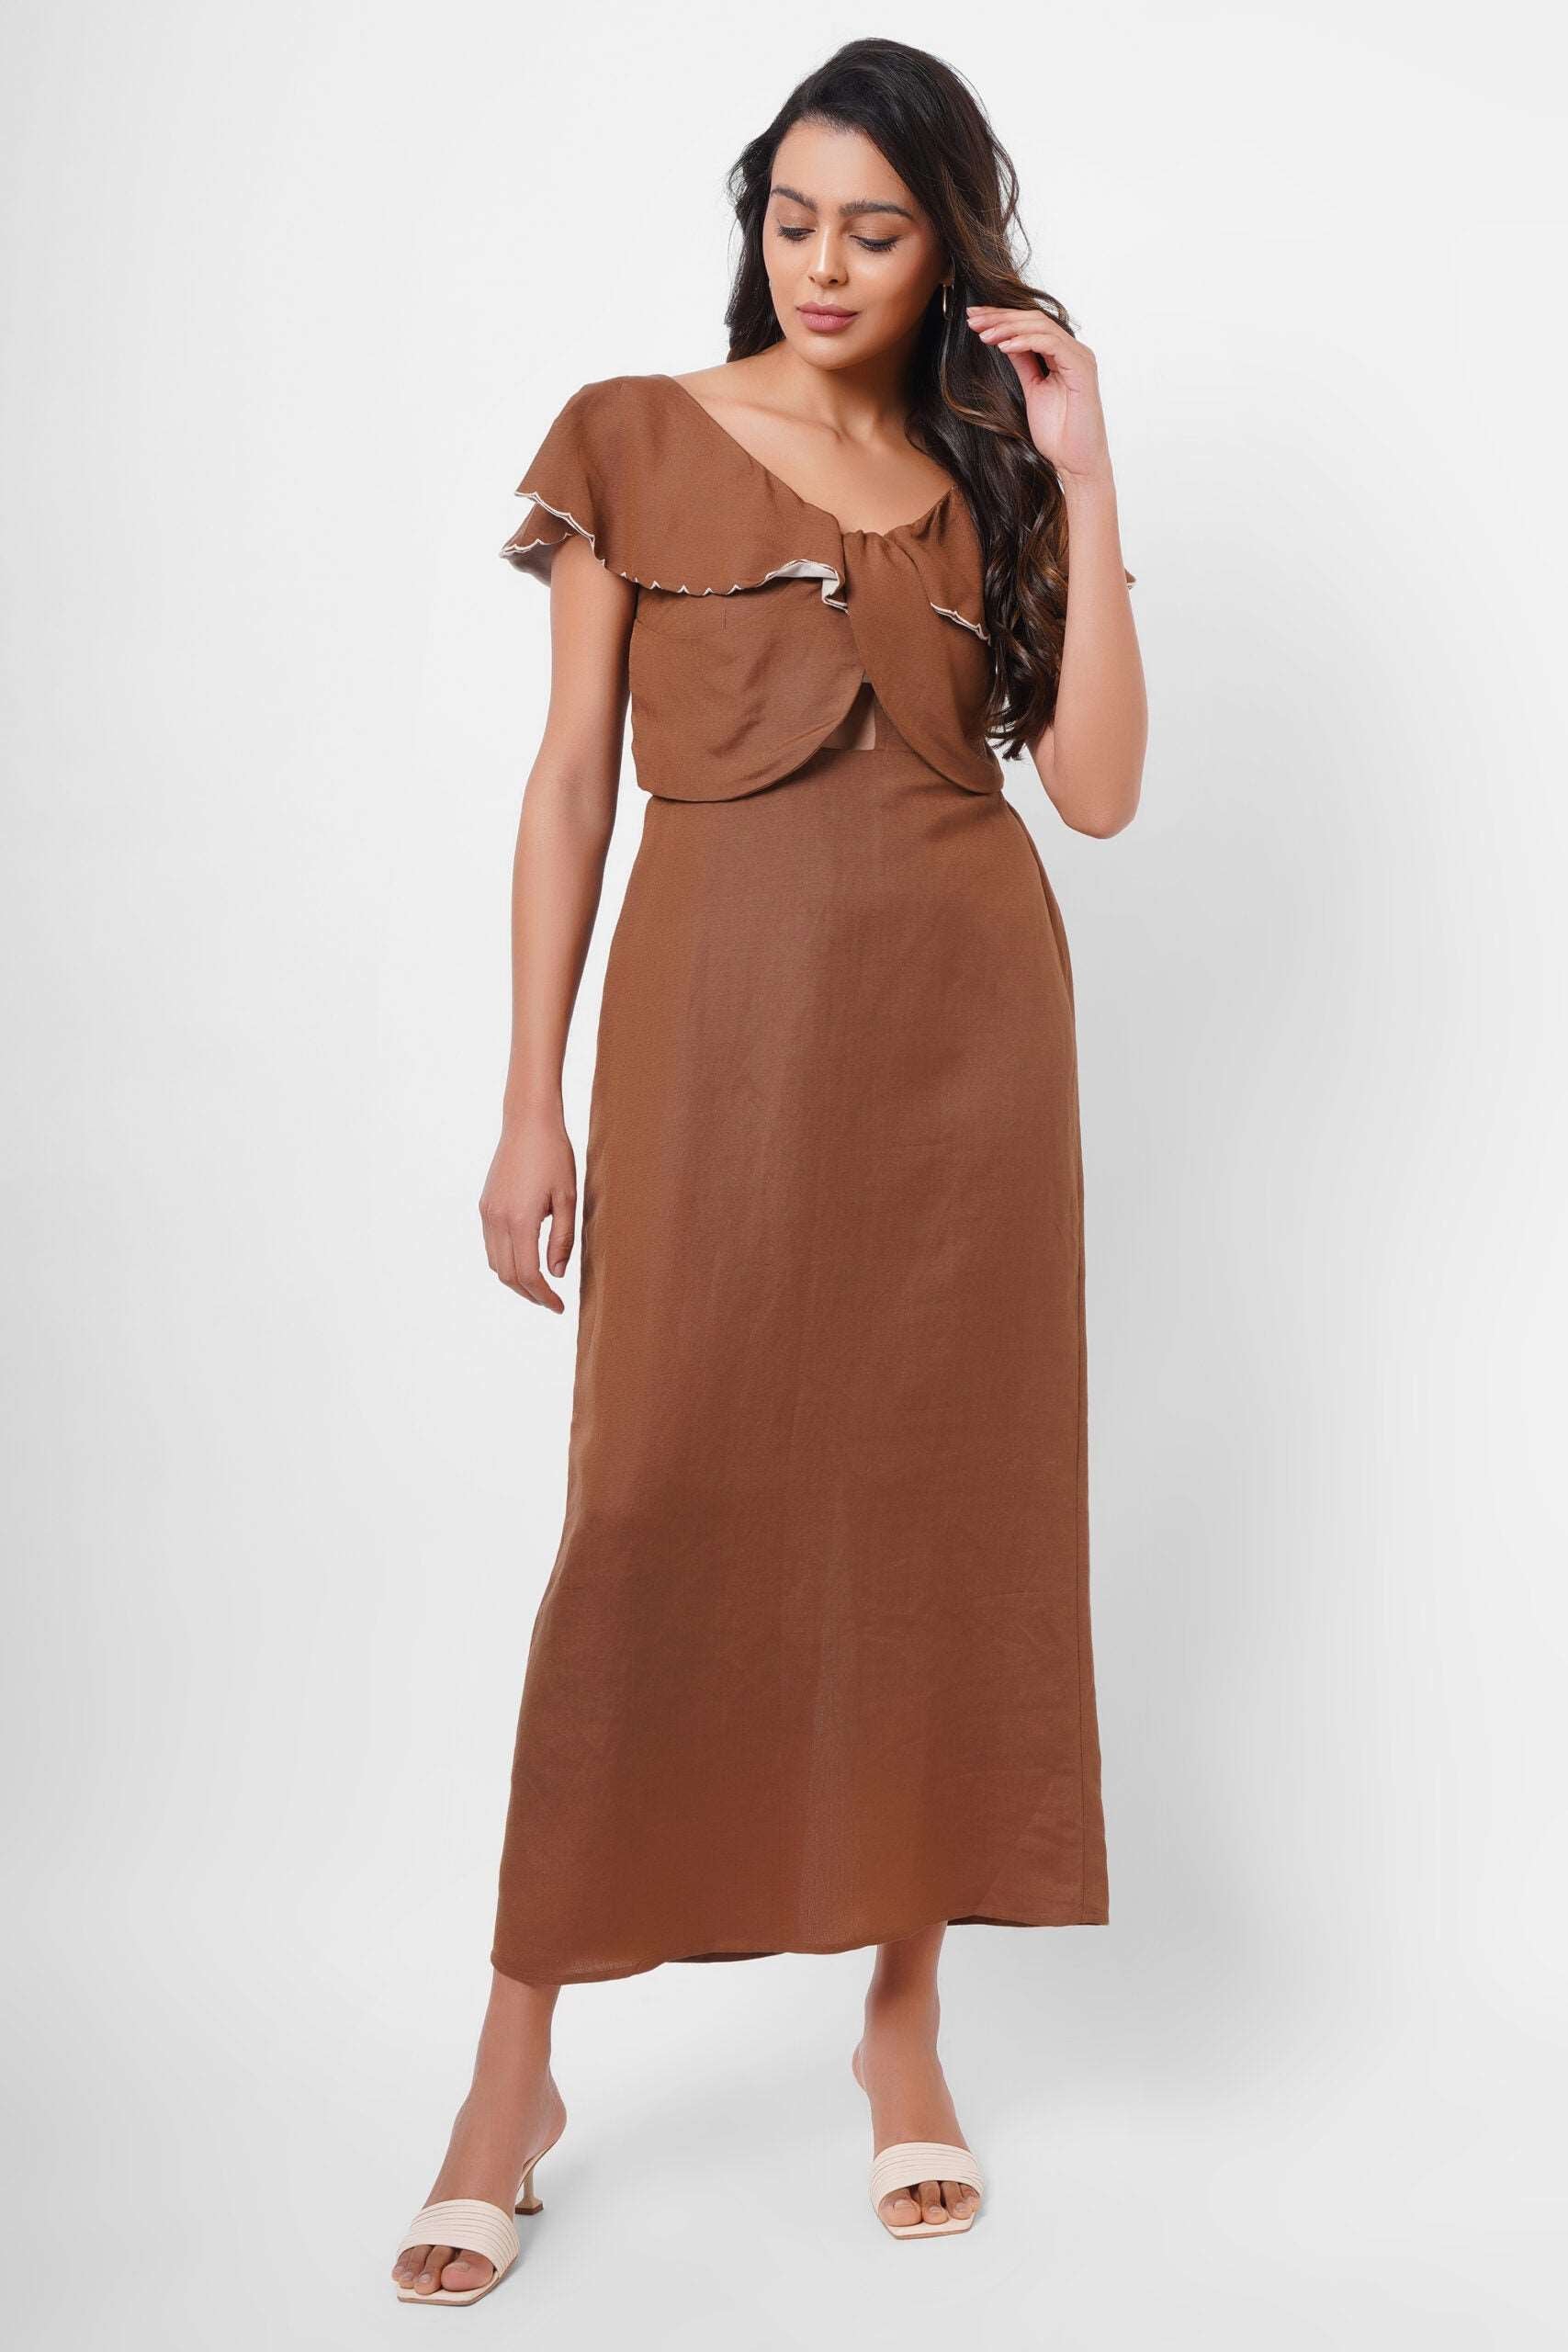 Scalloped Embroidery Brown Long Dress With Victorian Collar - Western Era  Dresses